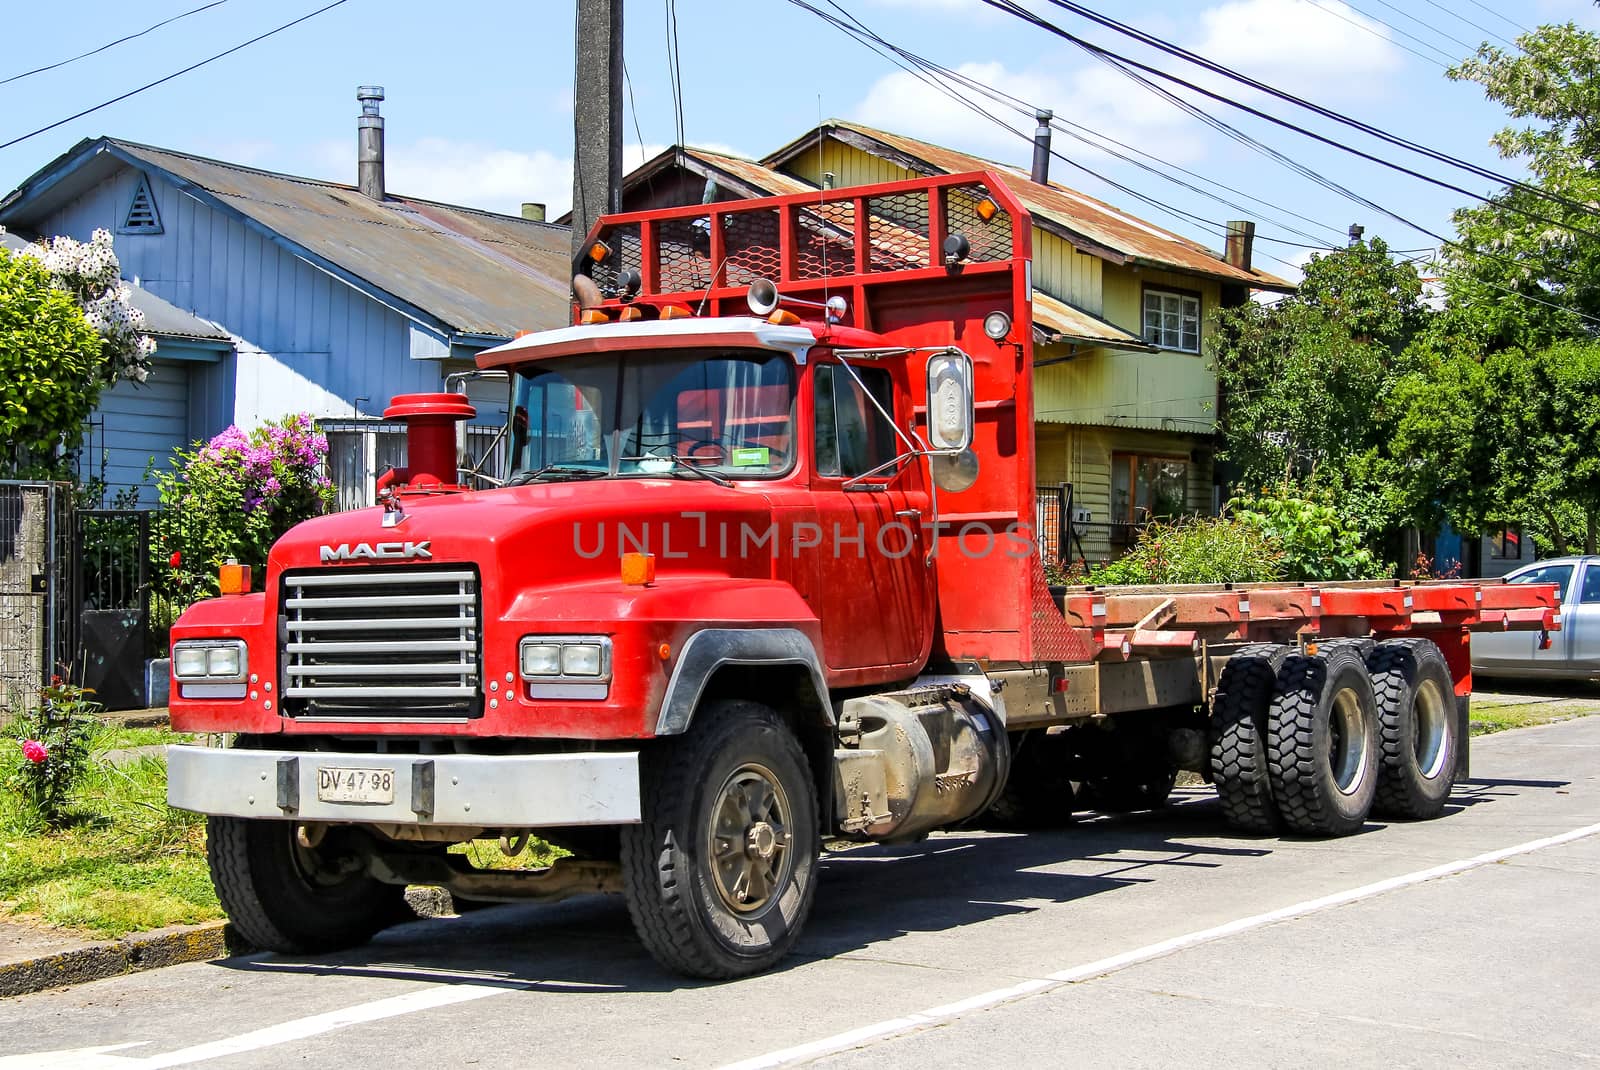 OSORNO, CHILE - NOVEMBER 21, 2015: Cargo truck Mack RD at the town street.